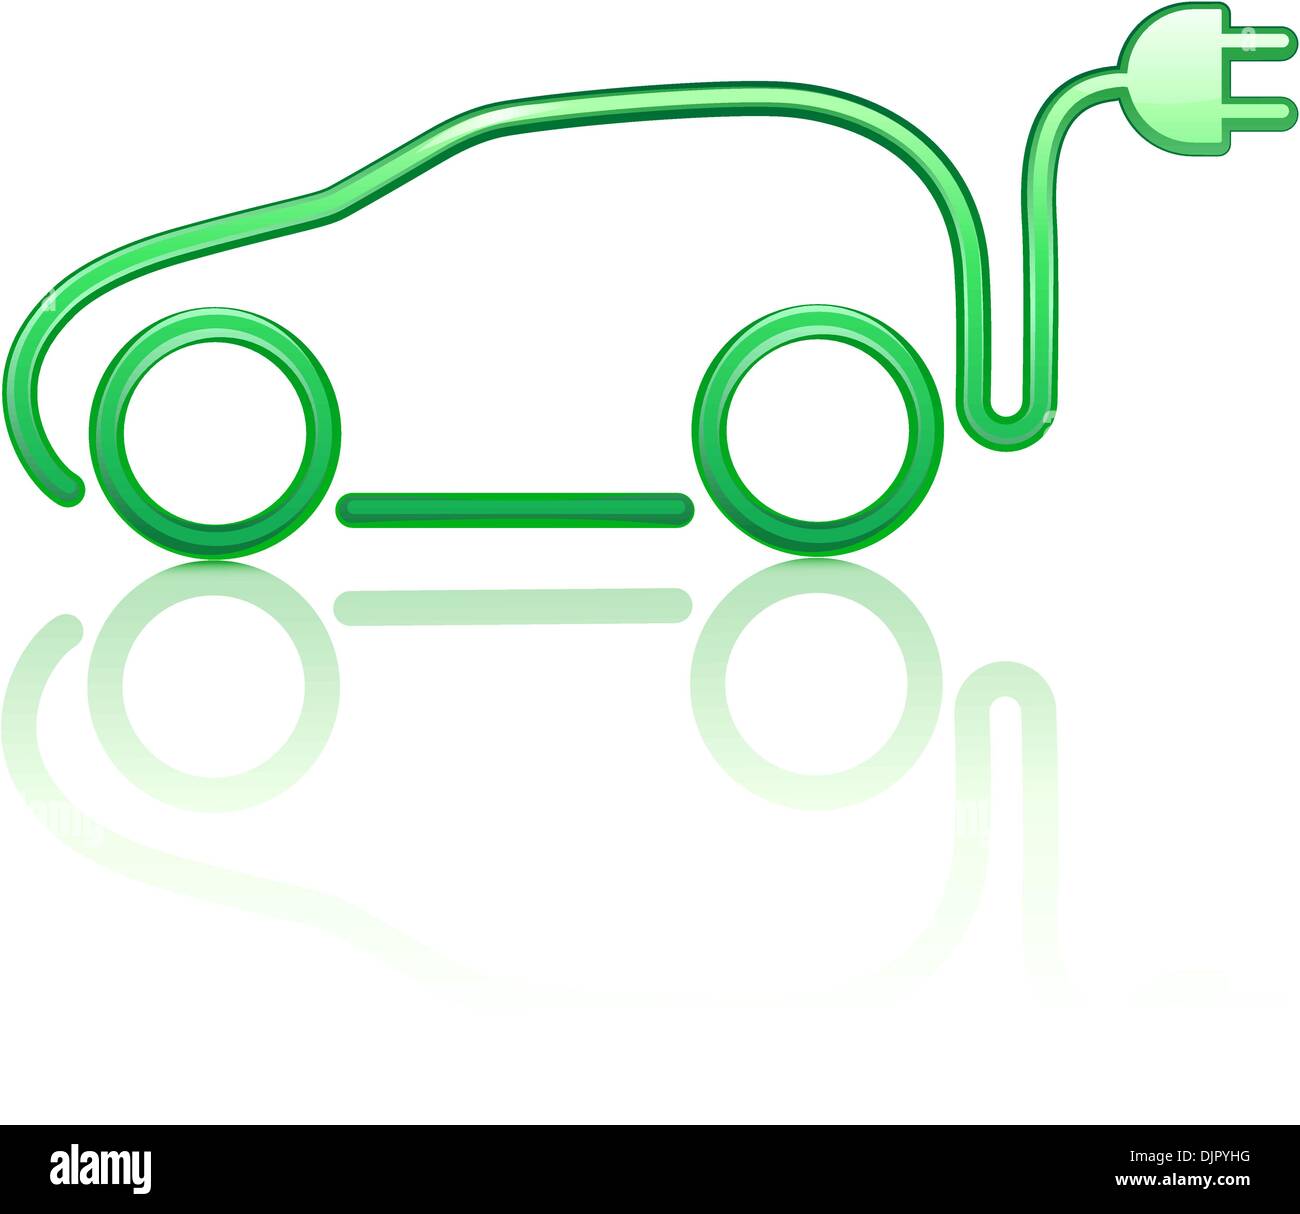 Vector illustration of electric powered car symbol Stock Vector